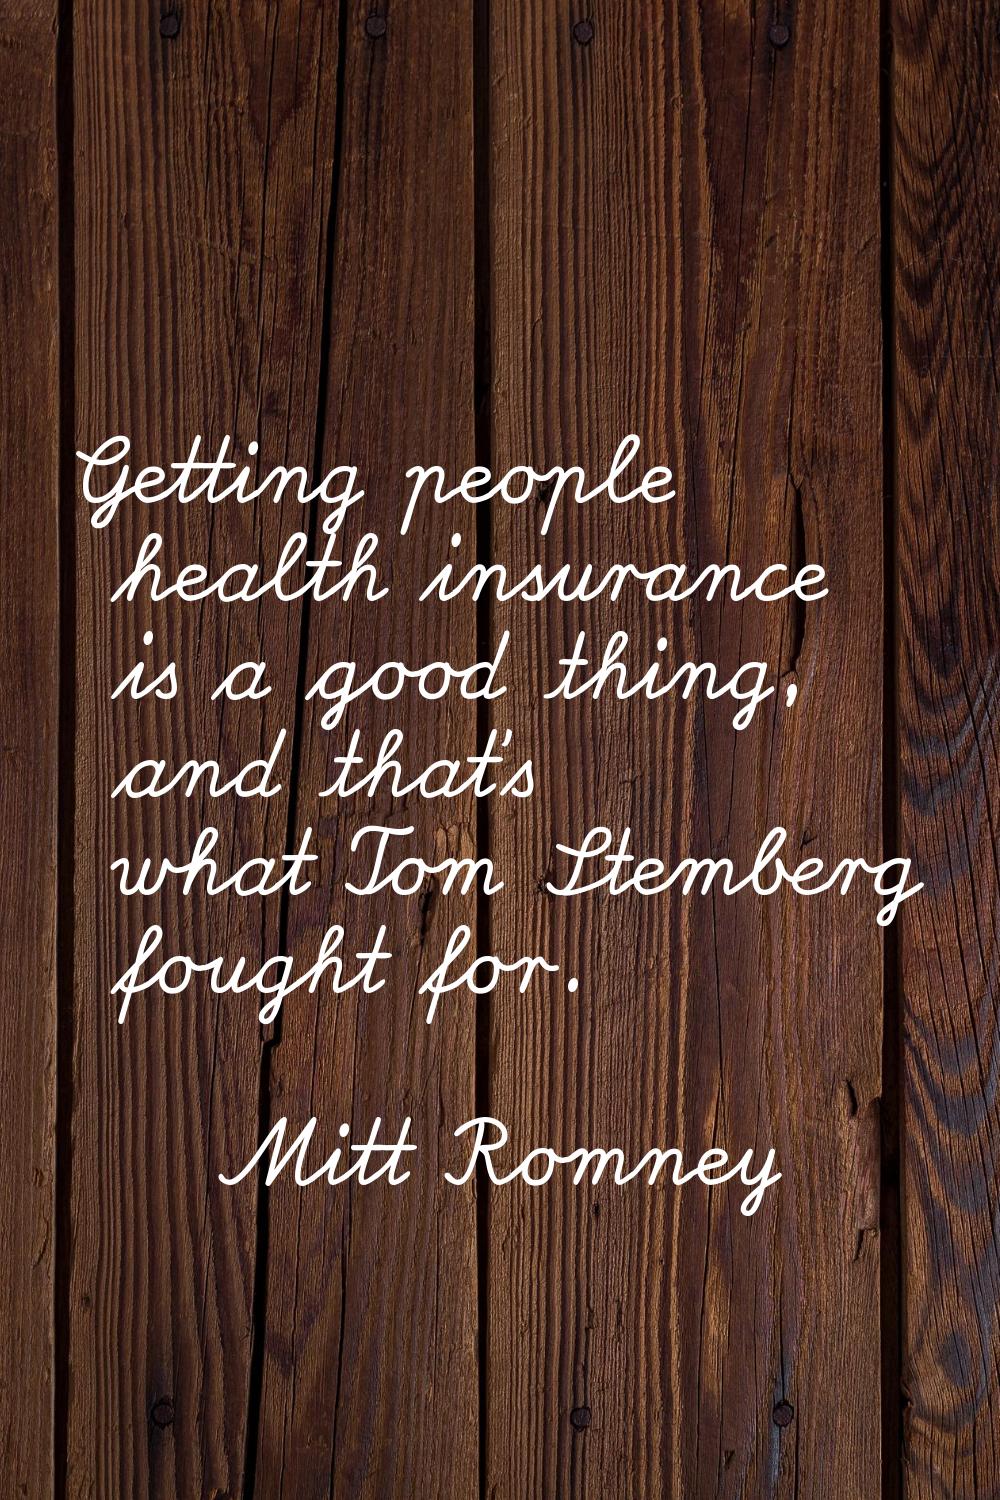 Getting people health insurance is a good thing, and that's what Tom Stemberg fought for.